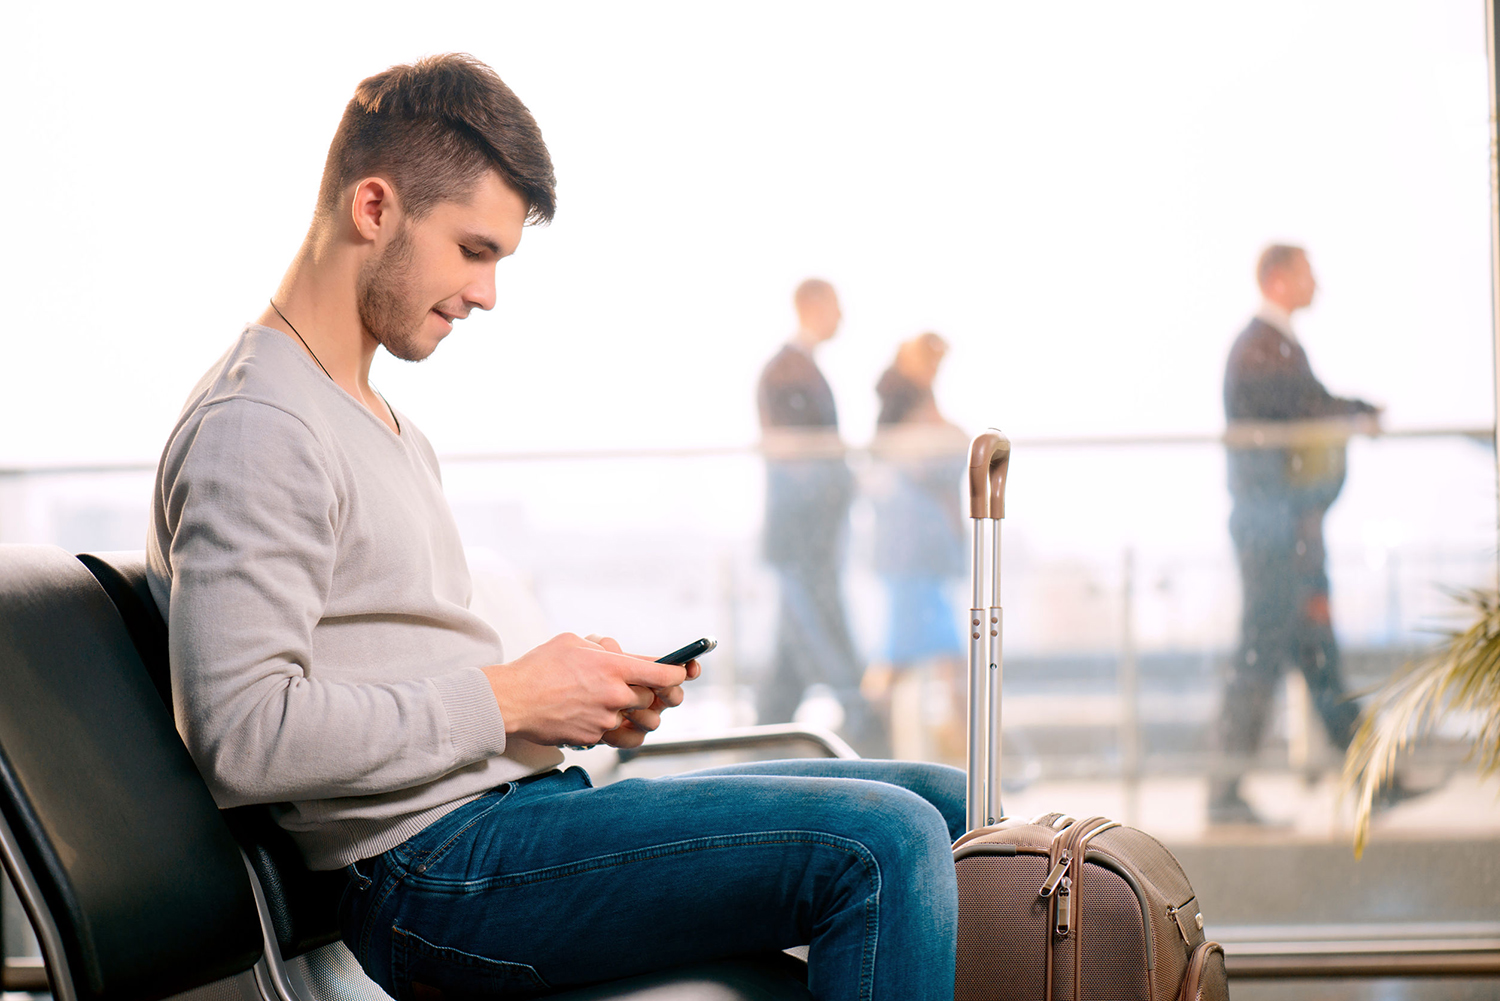 Is Data Secure On Your Phone Under Airplane Mode? -  Blog